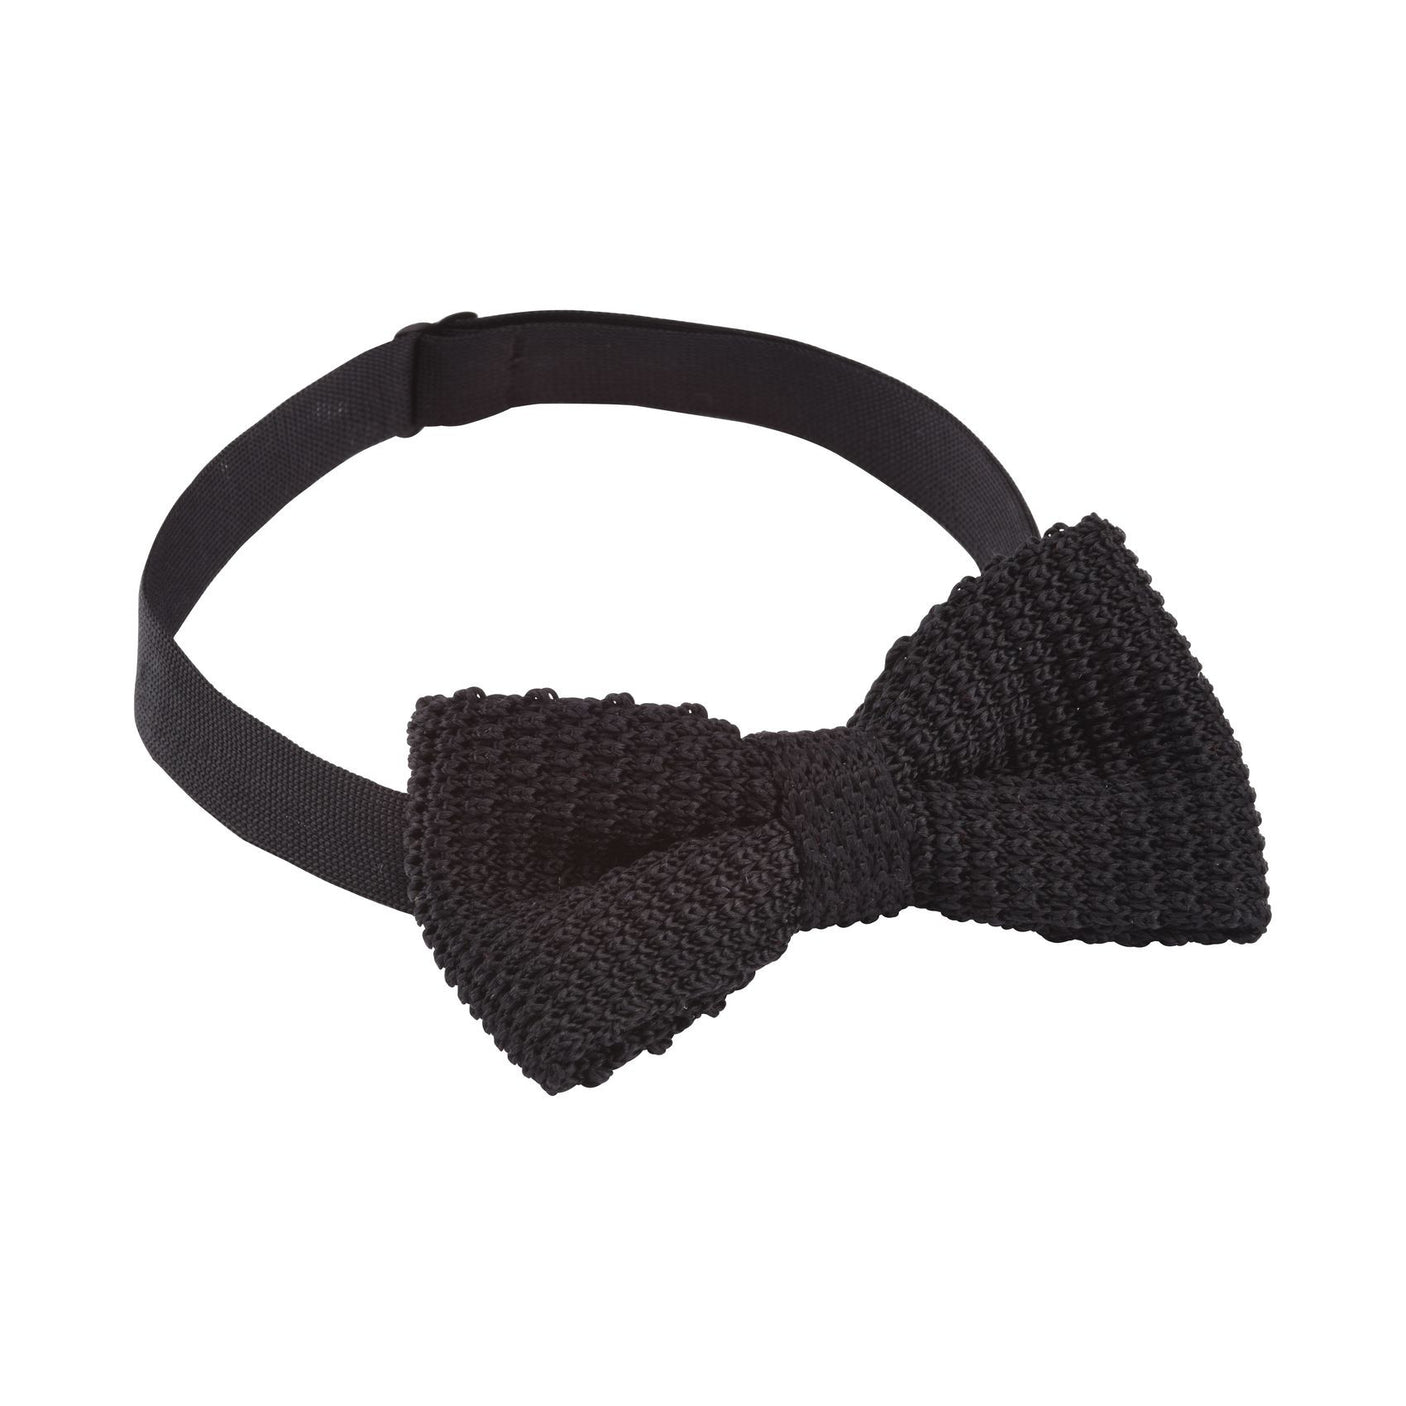 Men's knitted bow tie Black